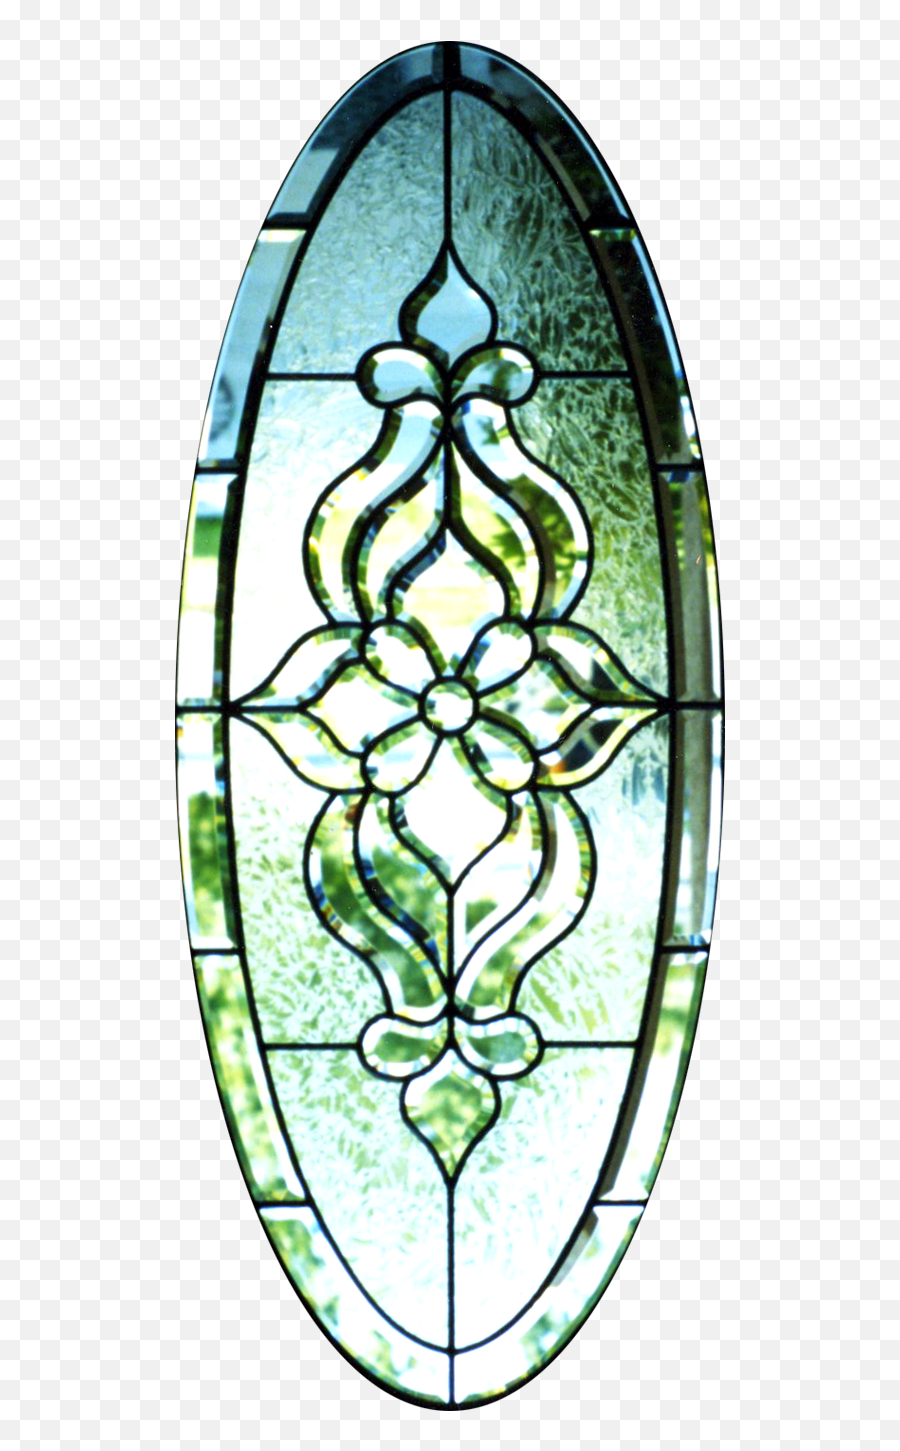 3d Stained Glass Patterns - Stained Glass Full Size Png Stained Glass,Stained Glass Png